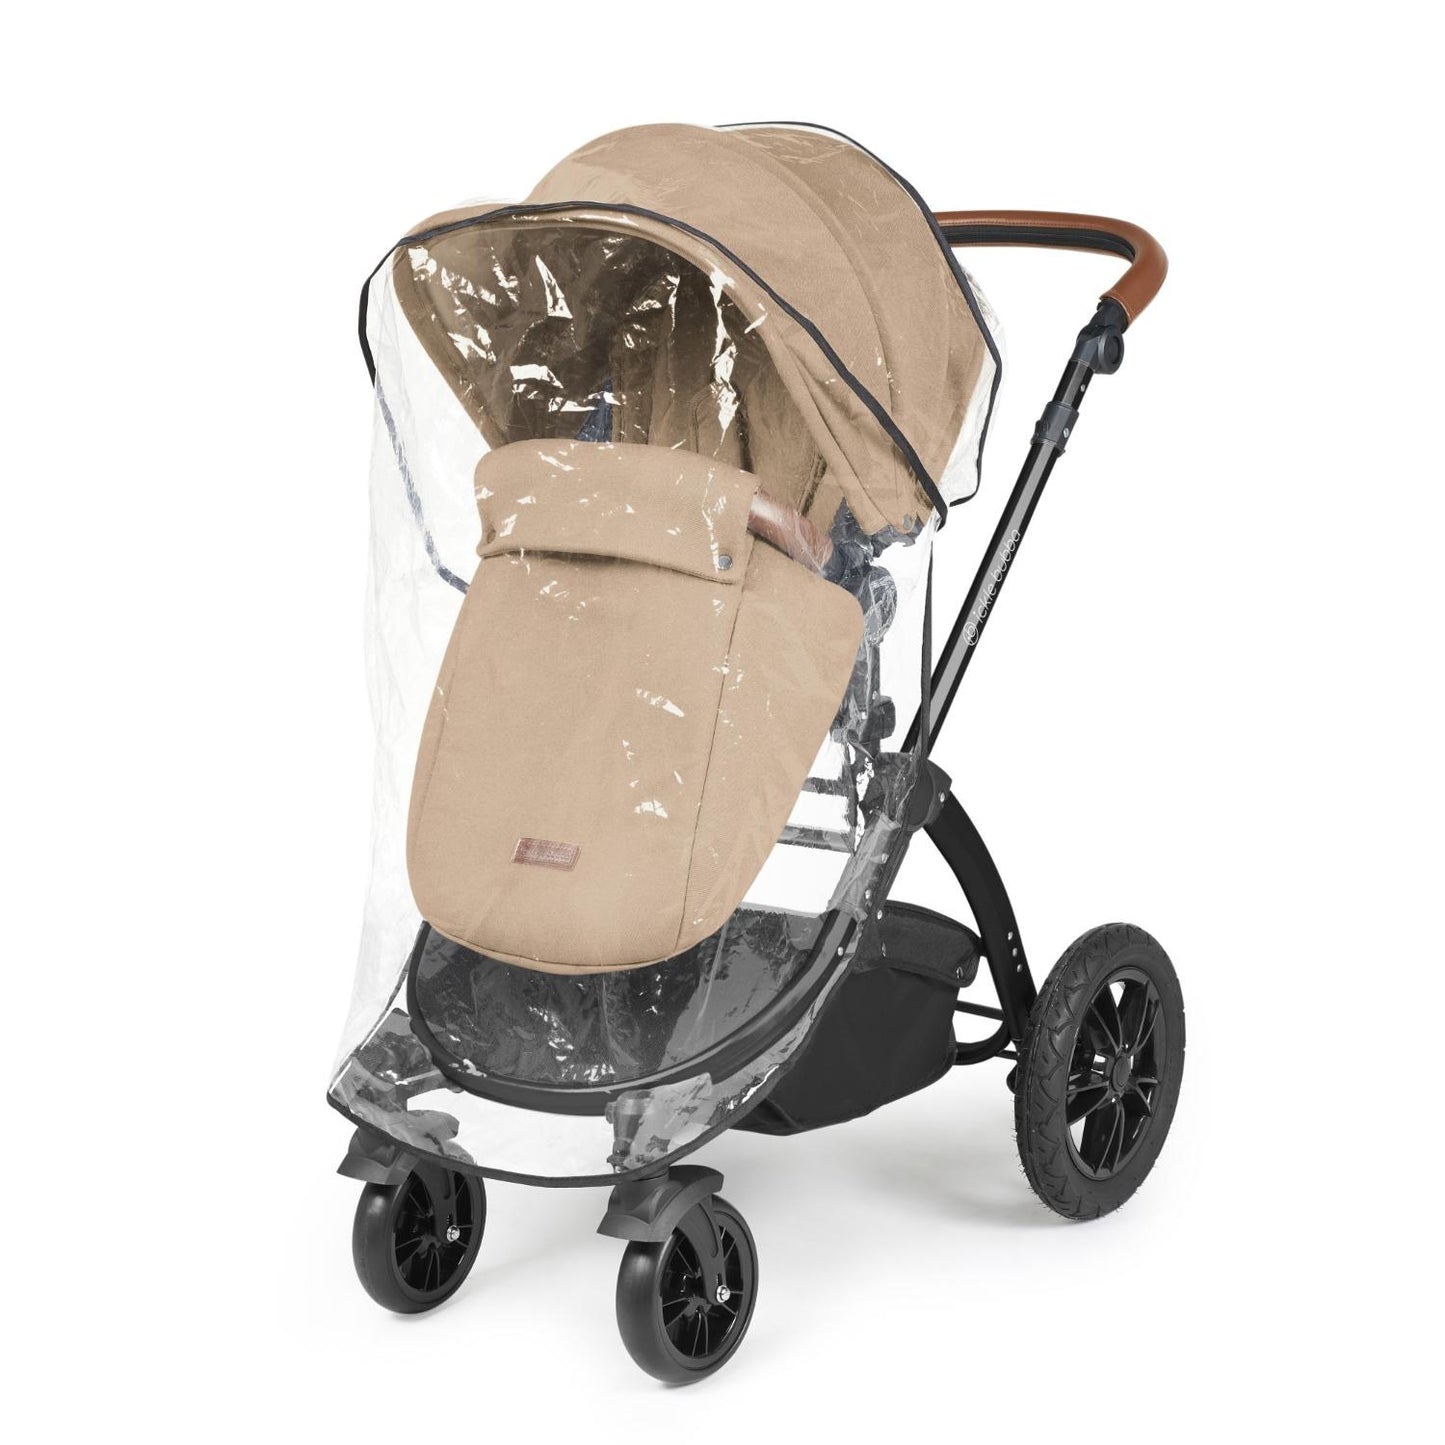 Rain cover placed on an Ickle Bubba Stomp Luxe Pushchair in Desert beige colour with tan handle